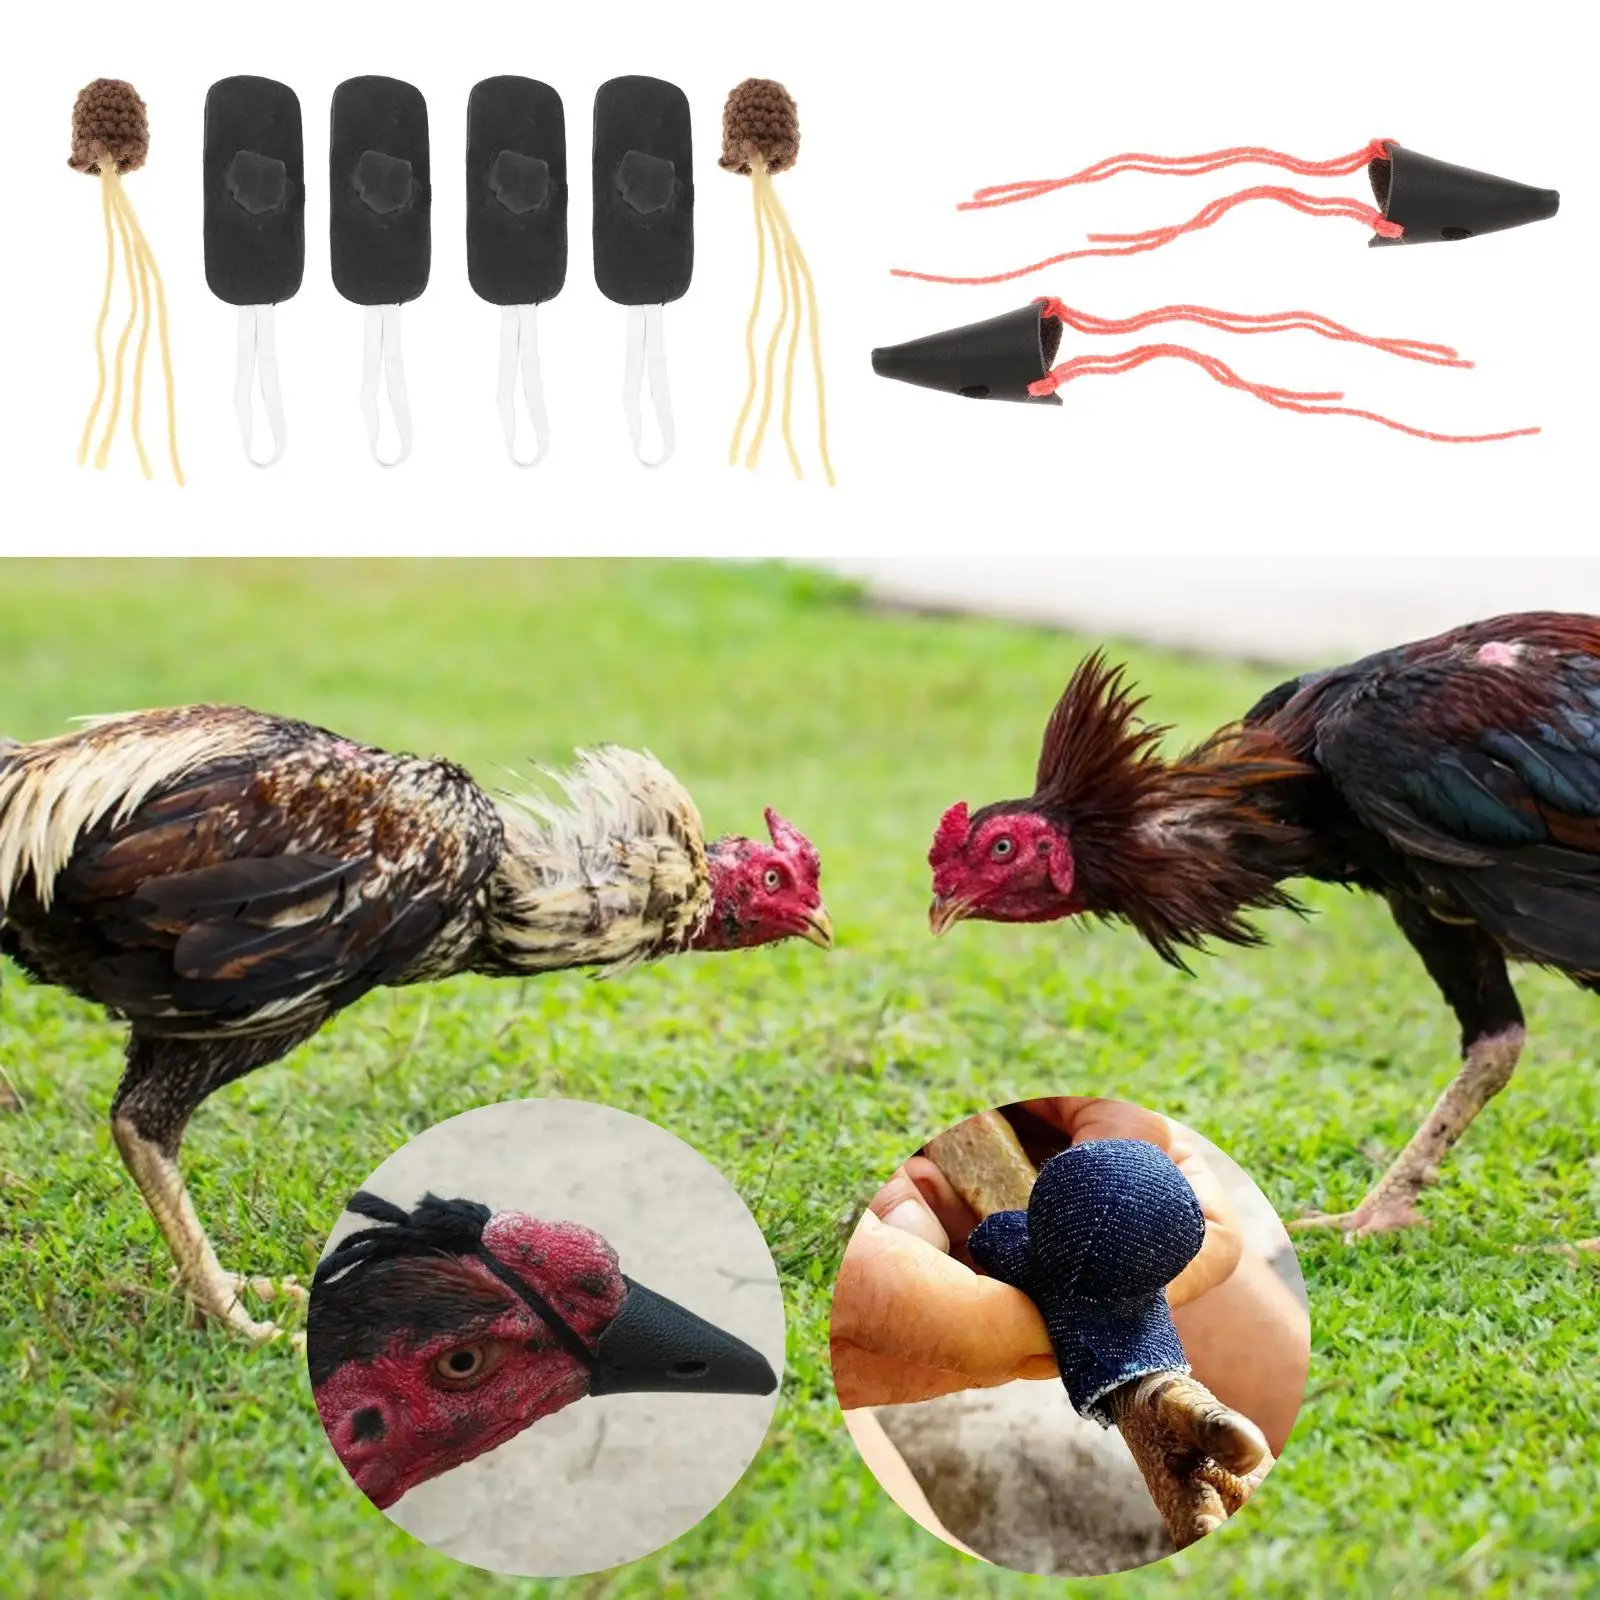  Fighting Foot Cover W/ Mouth Cover Accessories Animals Fighting Supplies Chicken Mitt Gamefowl Cockfighting Foot Cover